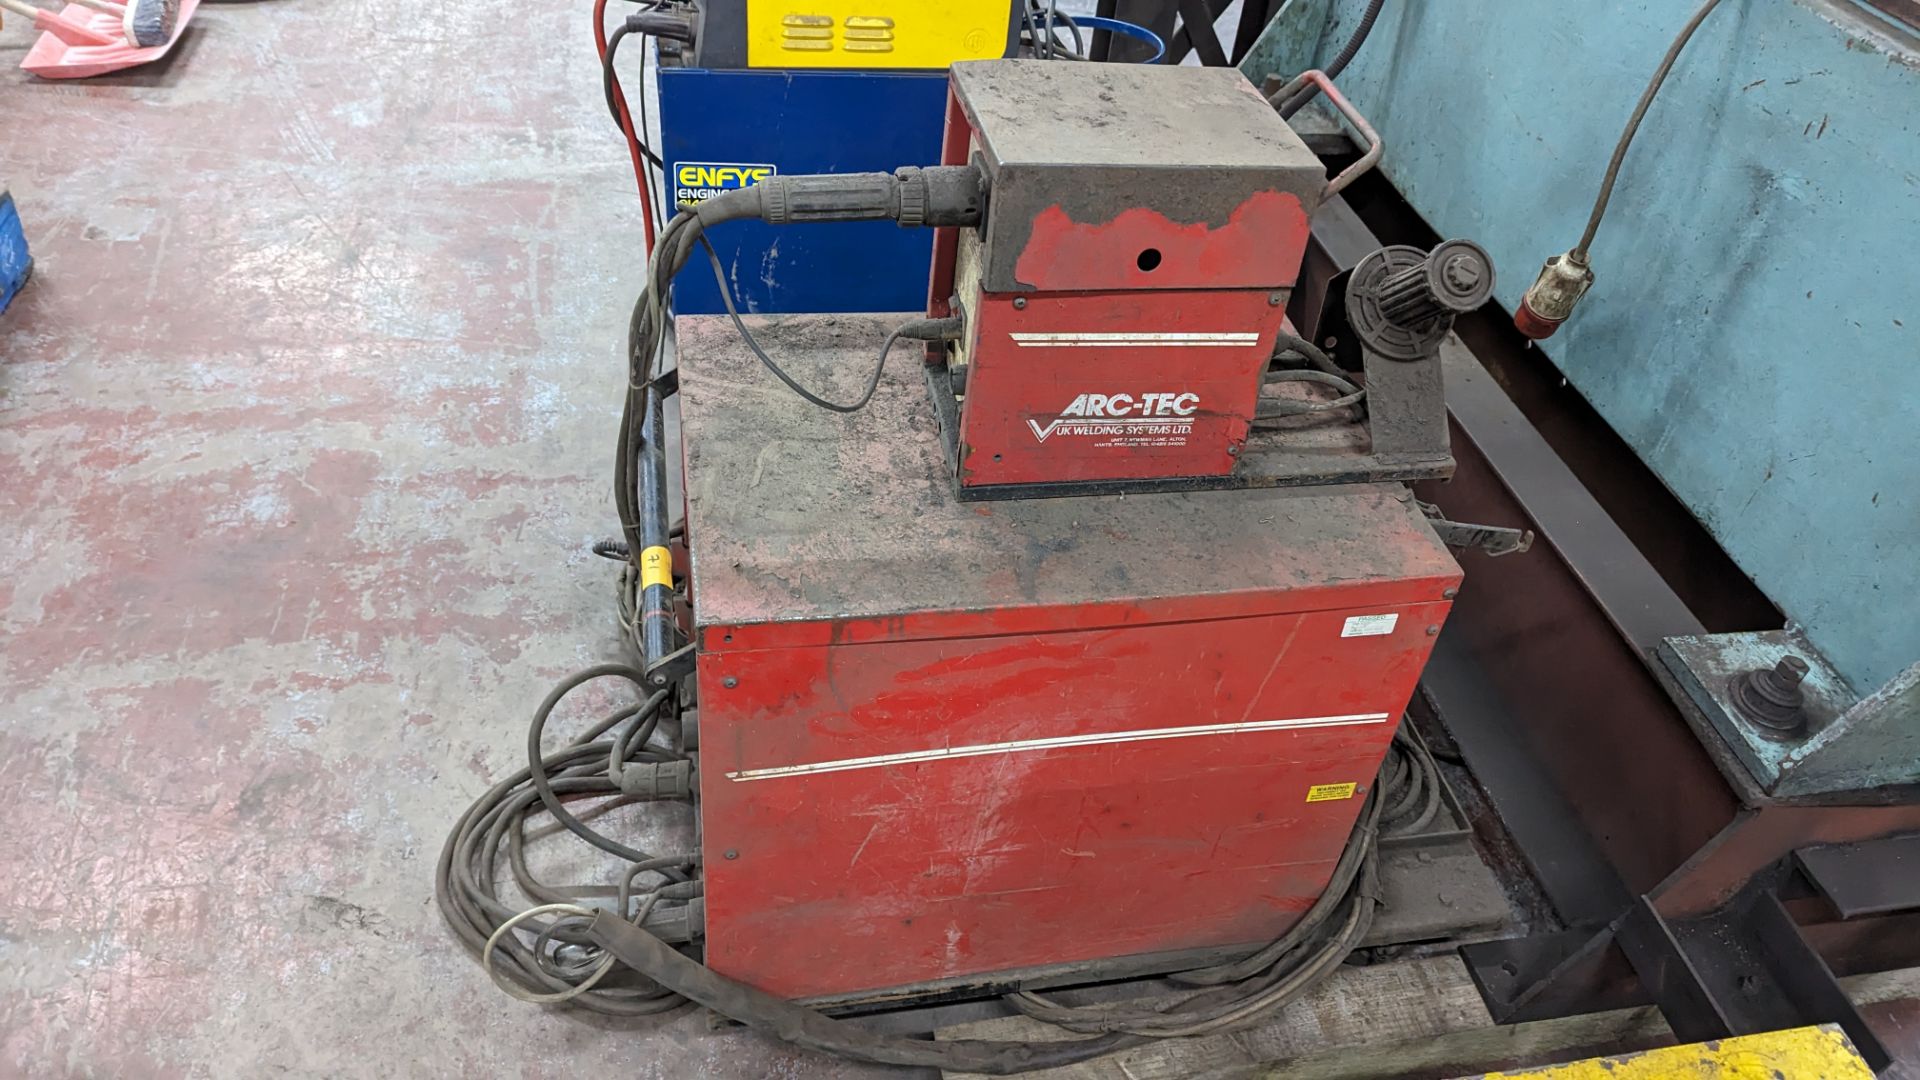 Arc Tec 250 welding system with model PSF2 feed, as located on top, plus various other ancillaries, - Image 10 of 10